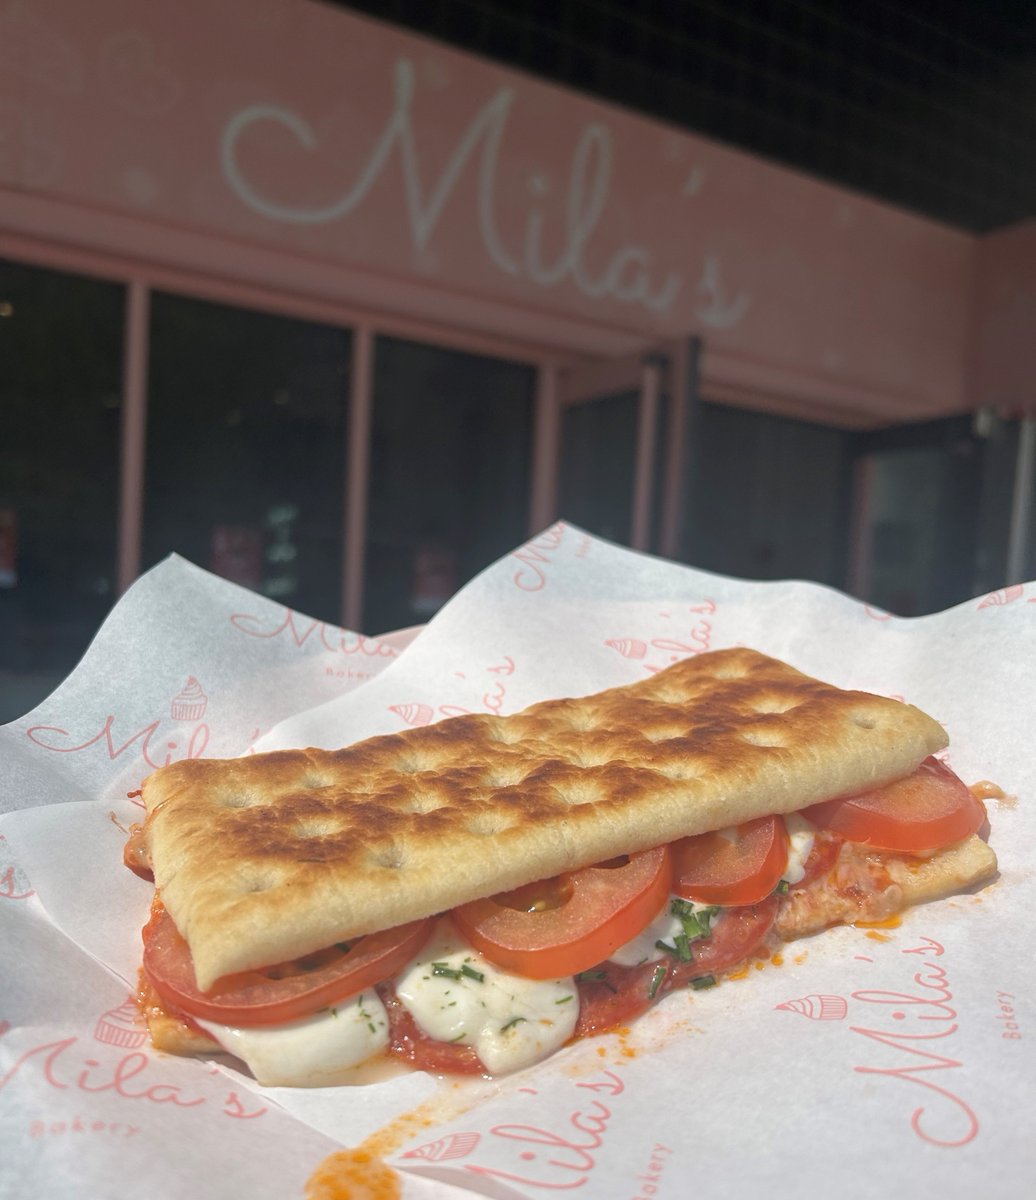 This week's special at Milas's Bakery in Old Town Street. Pizza filled focaccia - Mozzarella, cheddar, tomato & pepperoni - toasted. Have it in or take it away in the sun☀️